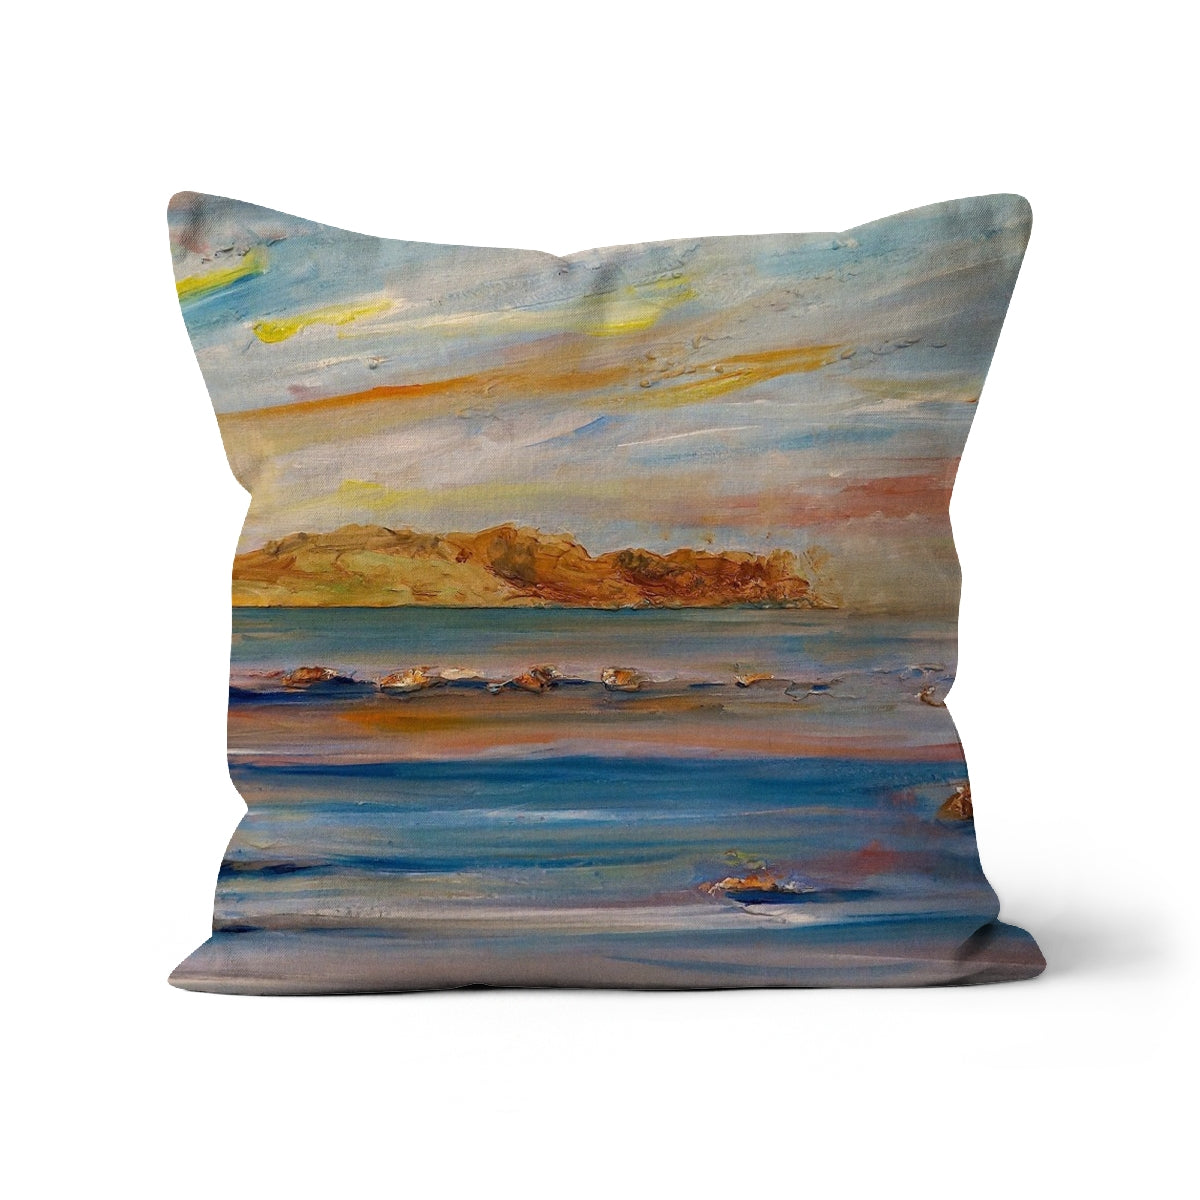 Tiree Dawn Art Gifts Cushion-Cushions-Hebridean Islands Art Gallery-Faux Suede-18"x18"-Paintings, Prints, Homeware, Art Gifts From Scotland By Scottish Artist Kevin Hunter